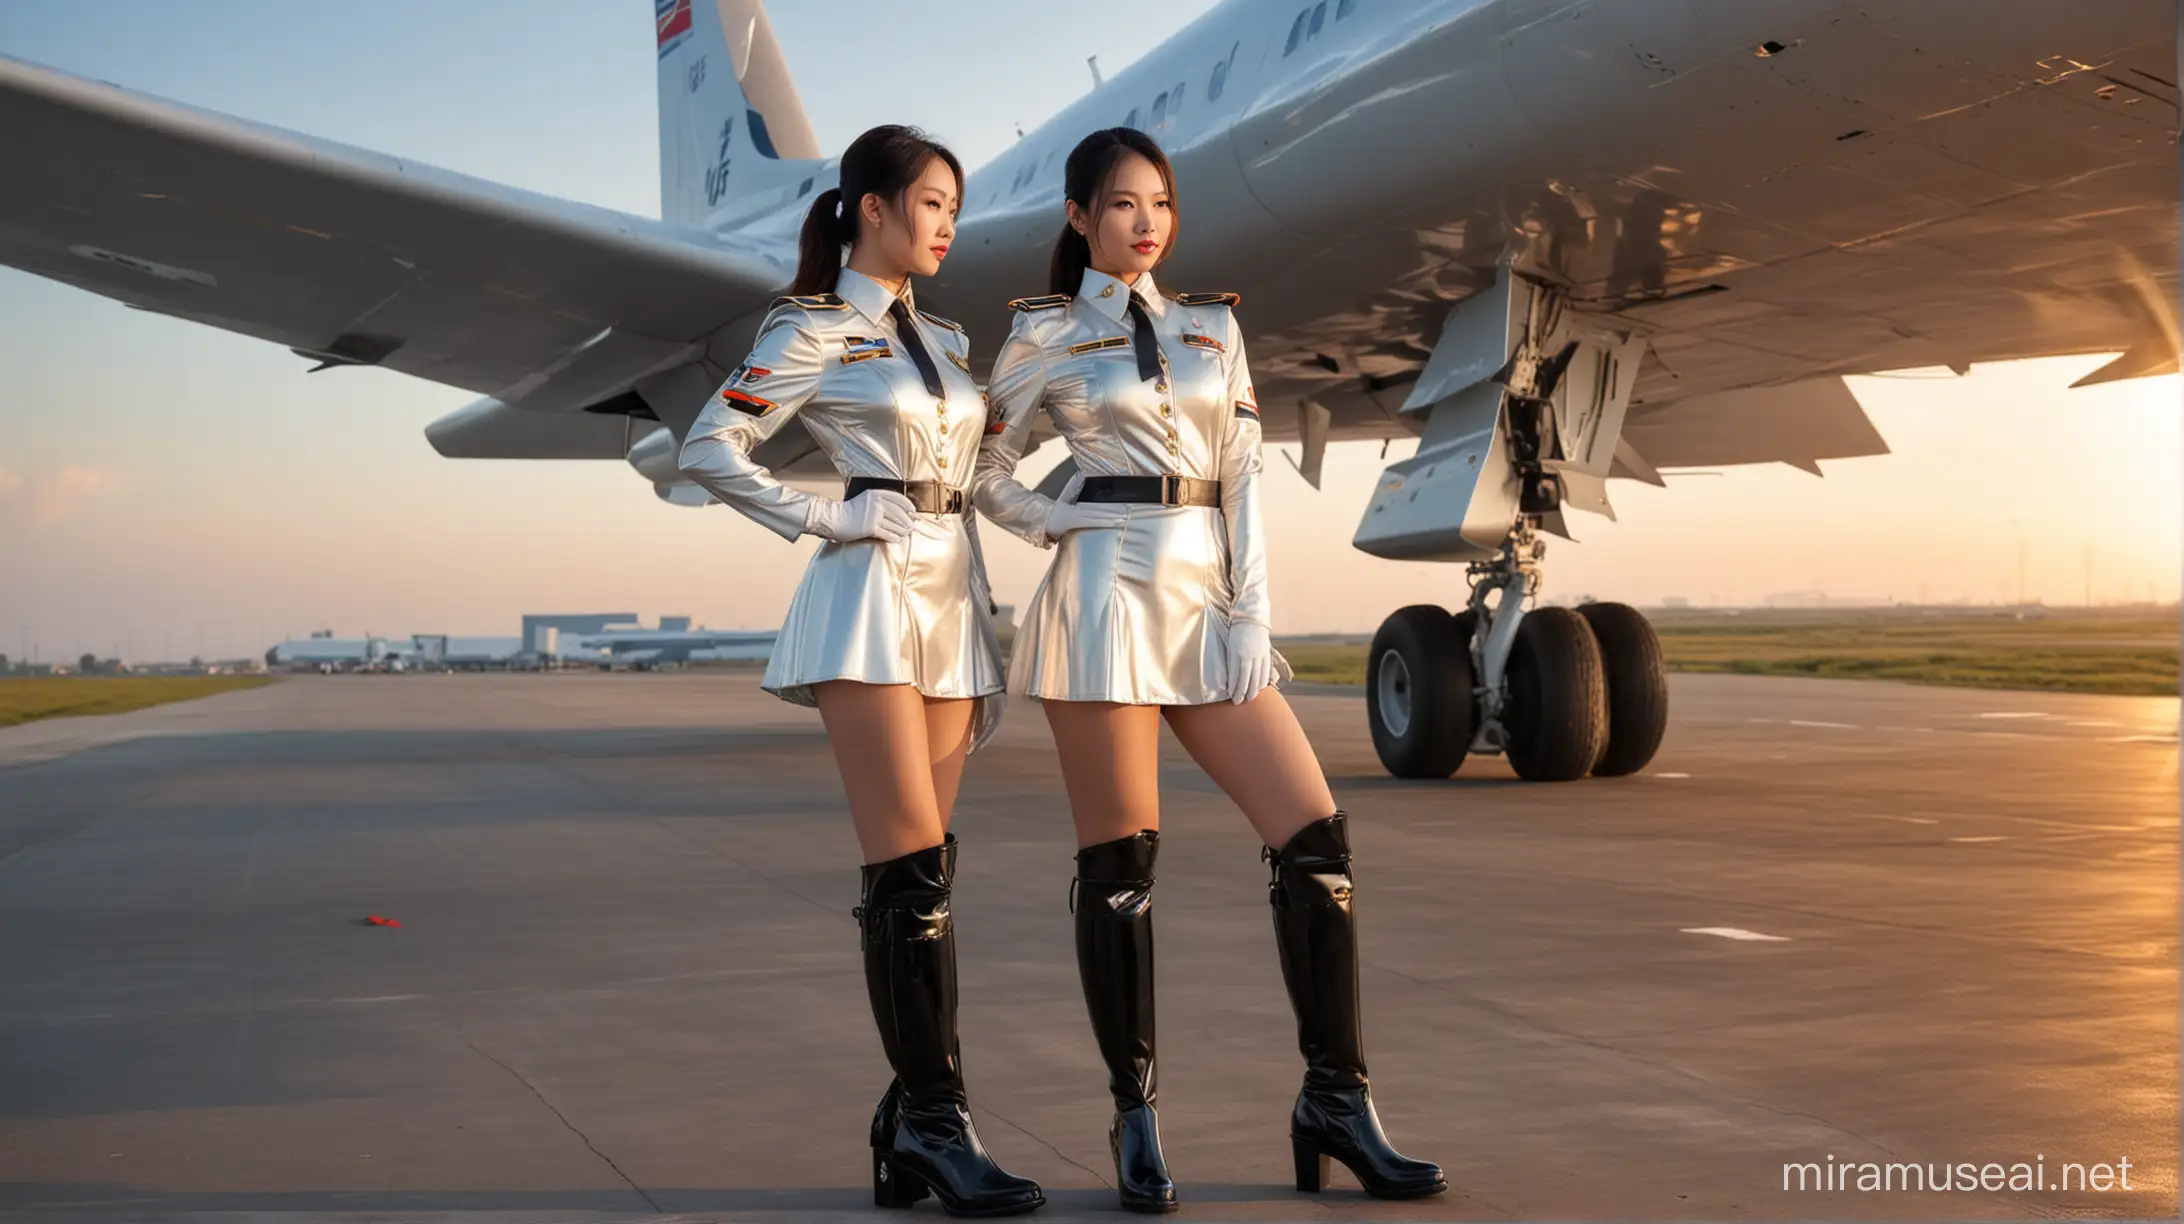 Chinese Woman in Shiny Latex Military Officer Uniform Beneath Airplane Wing at Sunset